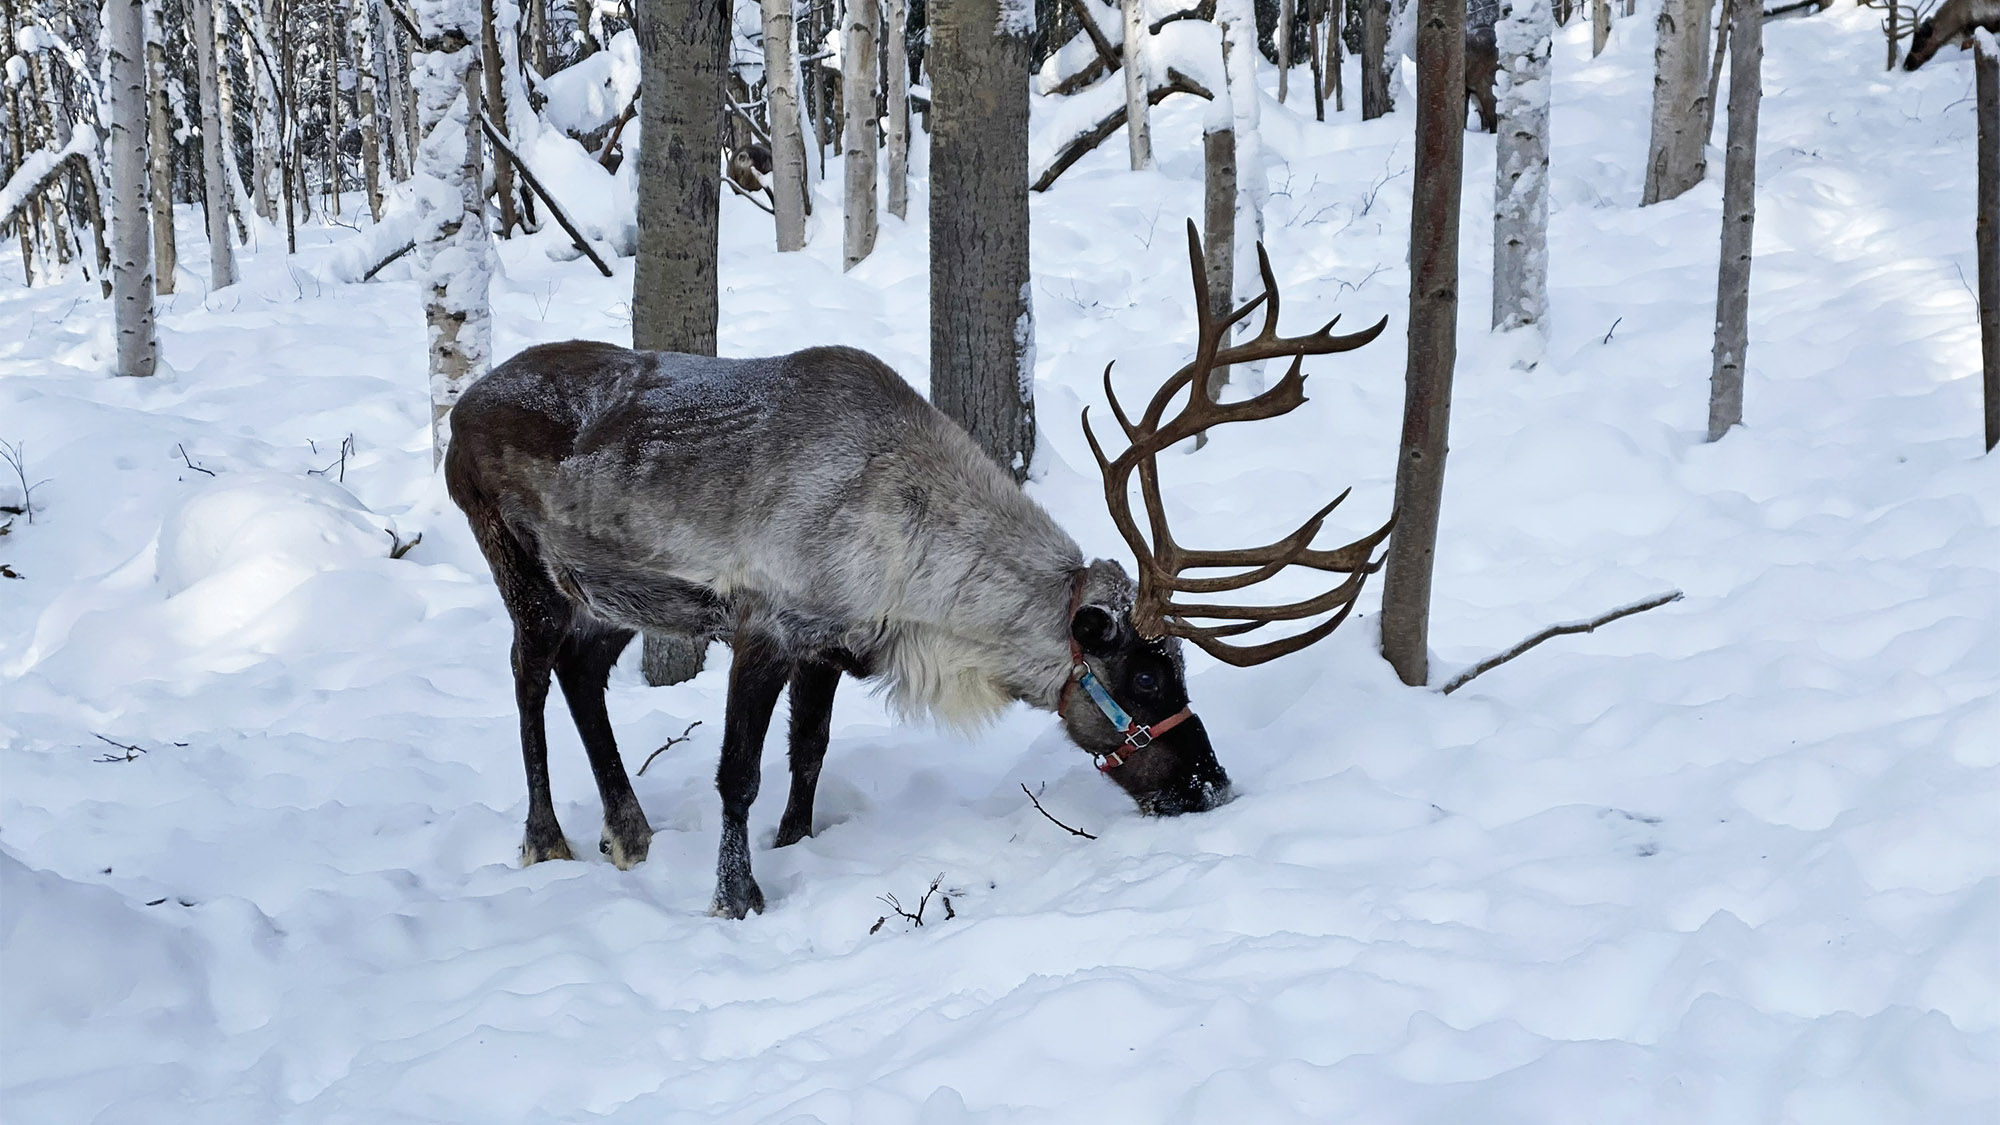 At the Running Reindeer Ranch near Fairbanks visitors can get up close with a herd of reindeer and even play with them. Here, a reindeer pokes through the snow searching for lichen, their favorite winter food.